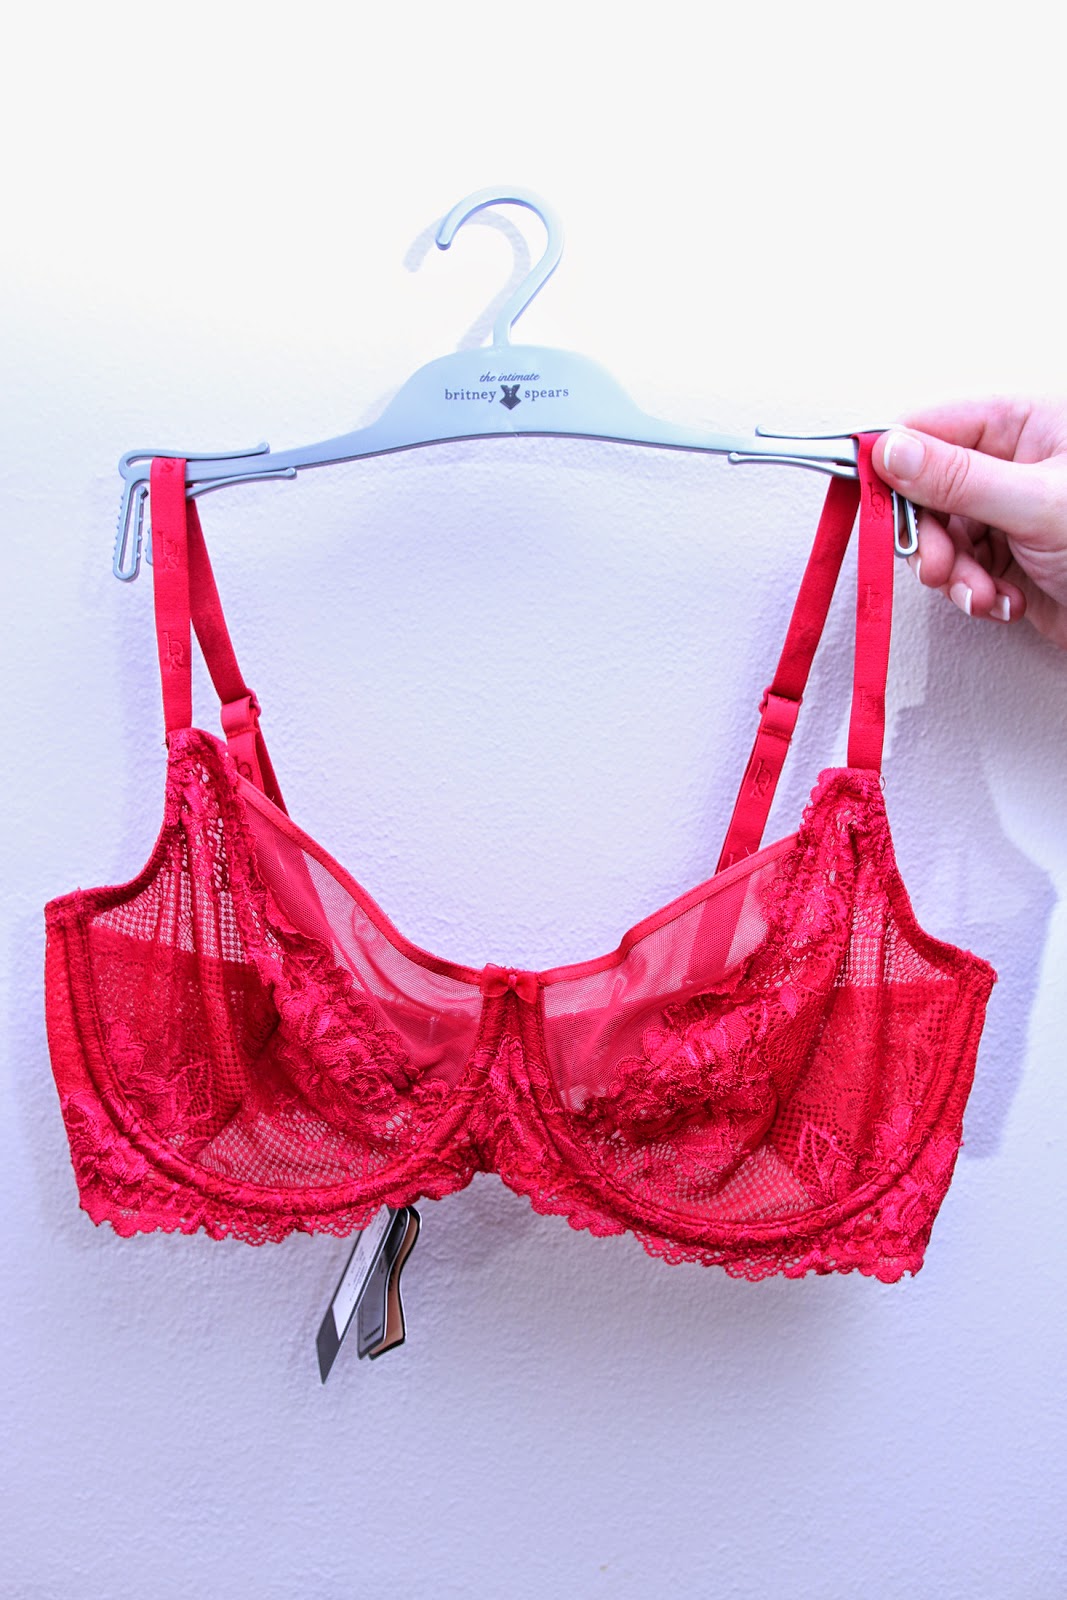 FASHION IN OSLO: The Intimate Britney Spears for CHANGE Lingerie